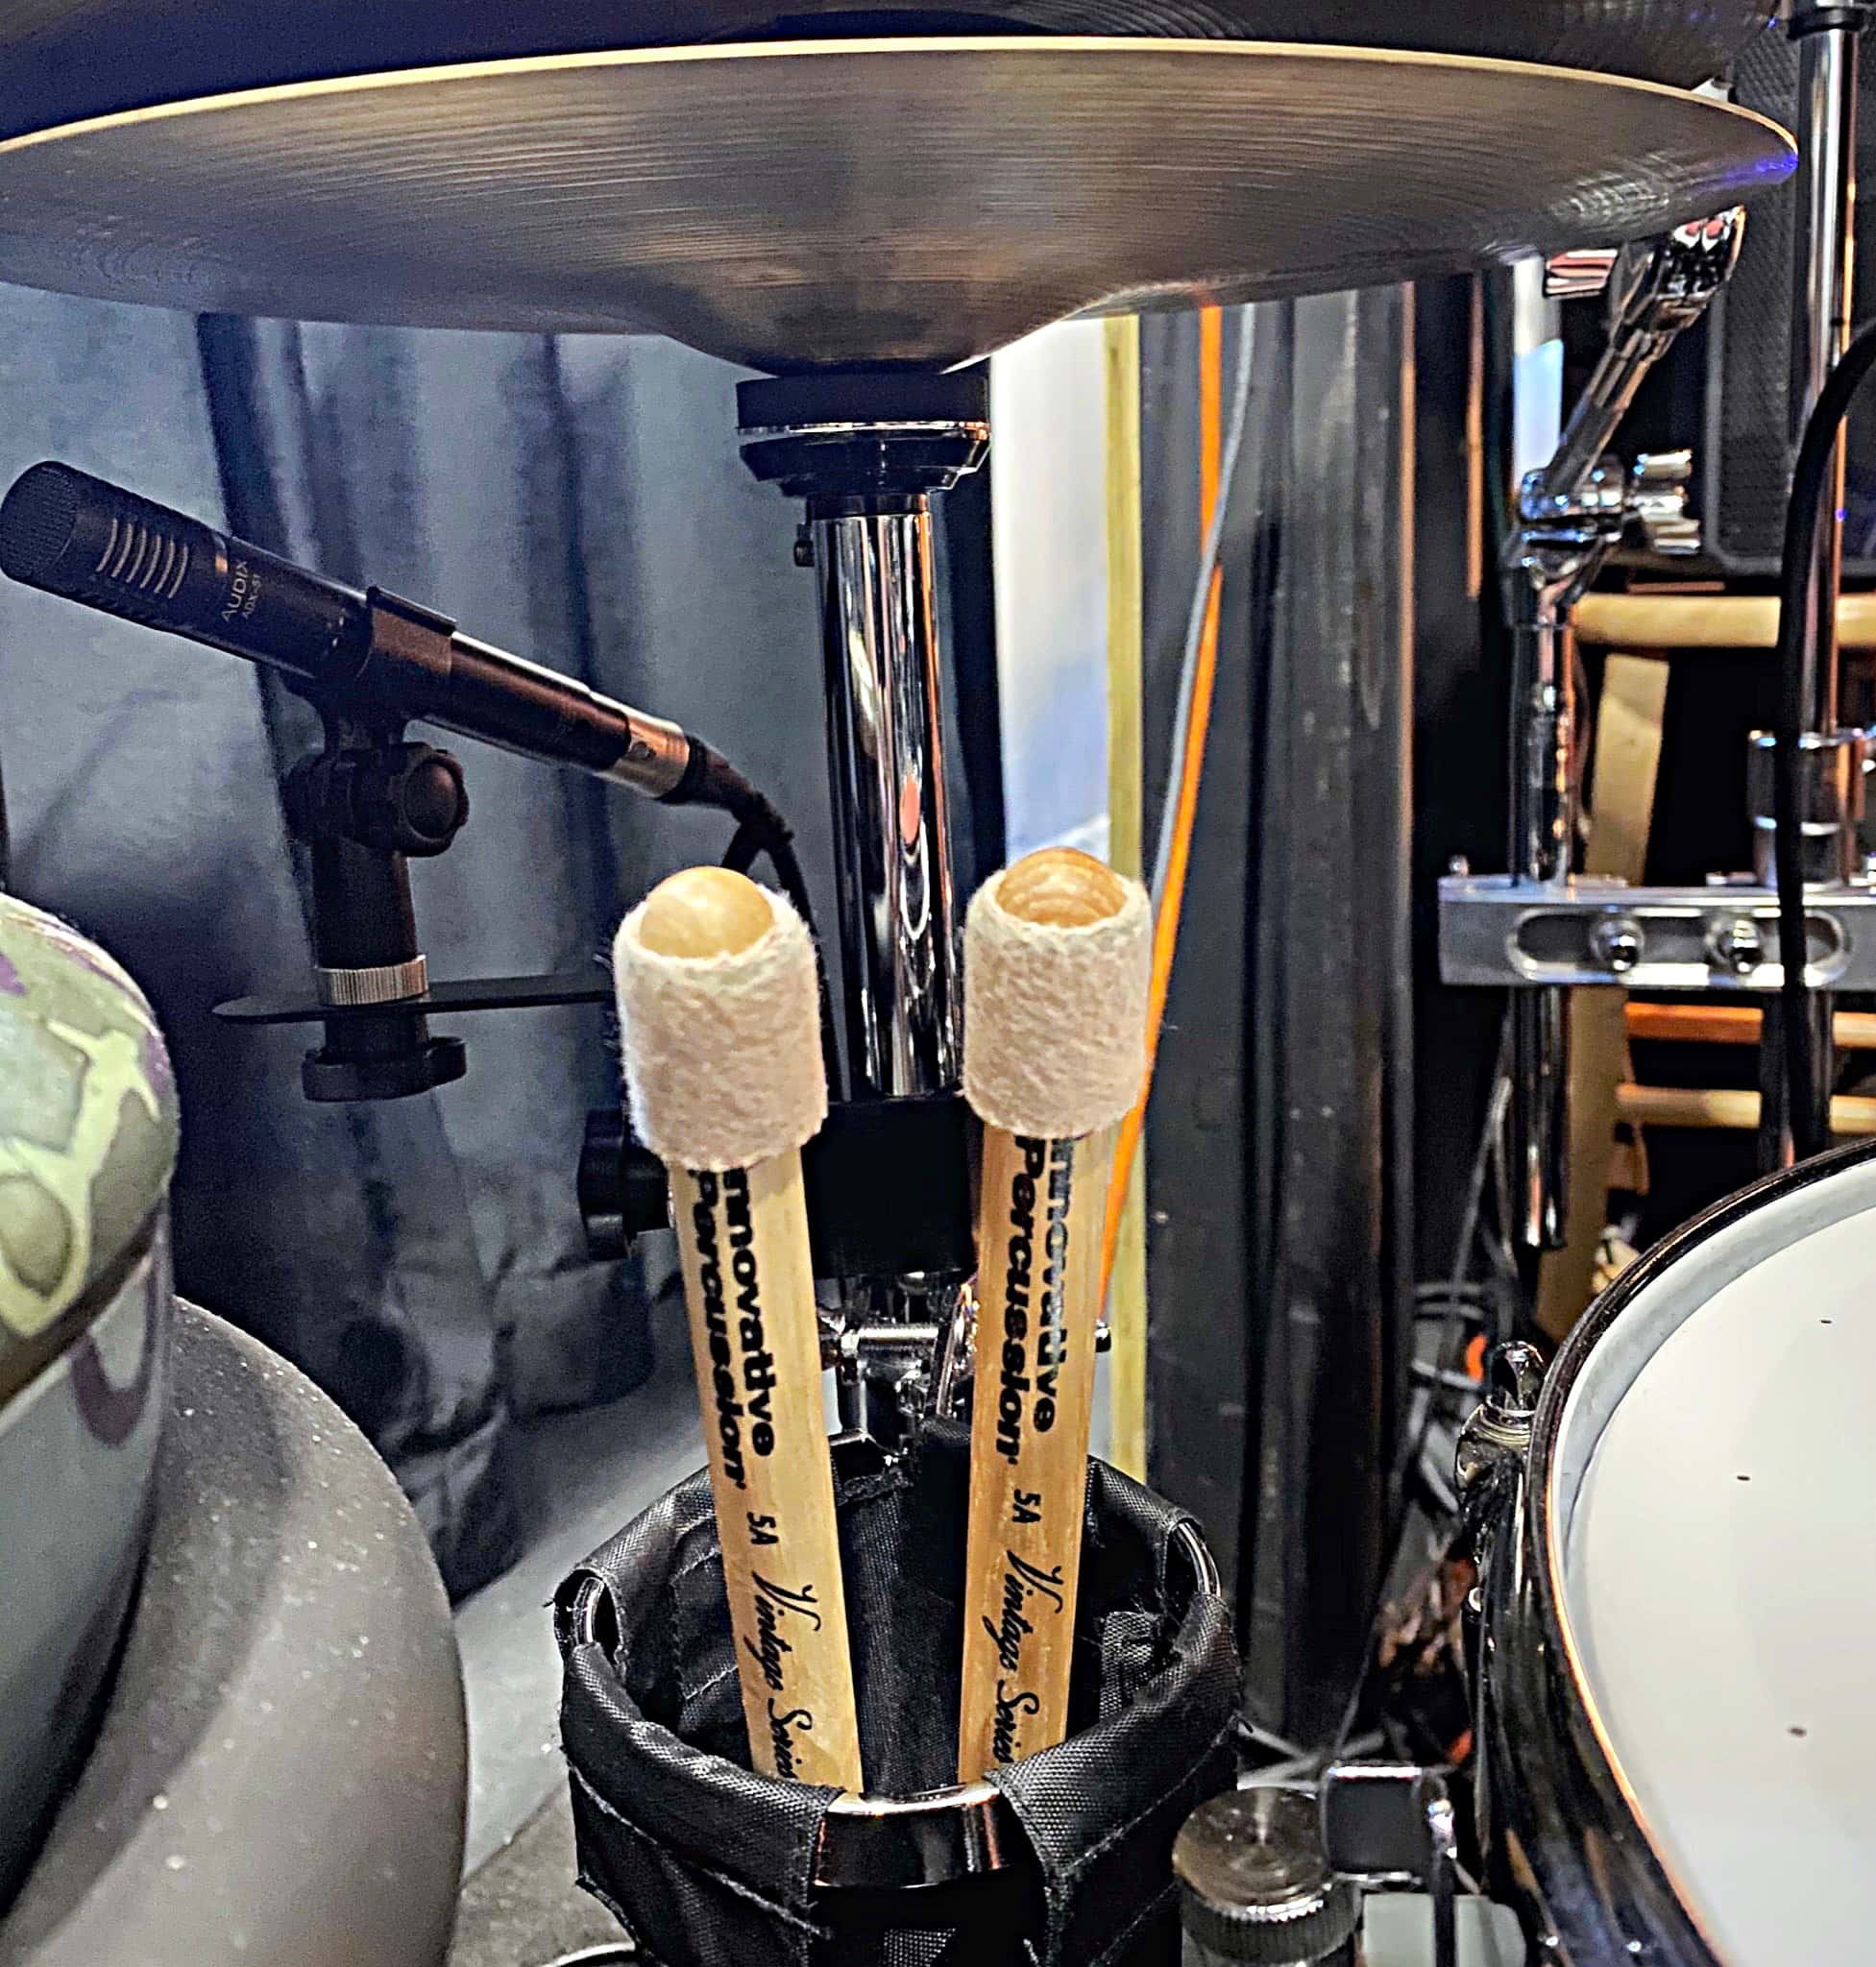 Jeremy Logan's drum set setup for Kiss Me Kate at the William R. Boone High School in Orlando, Florida.